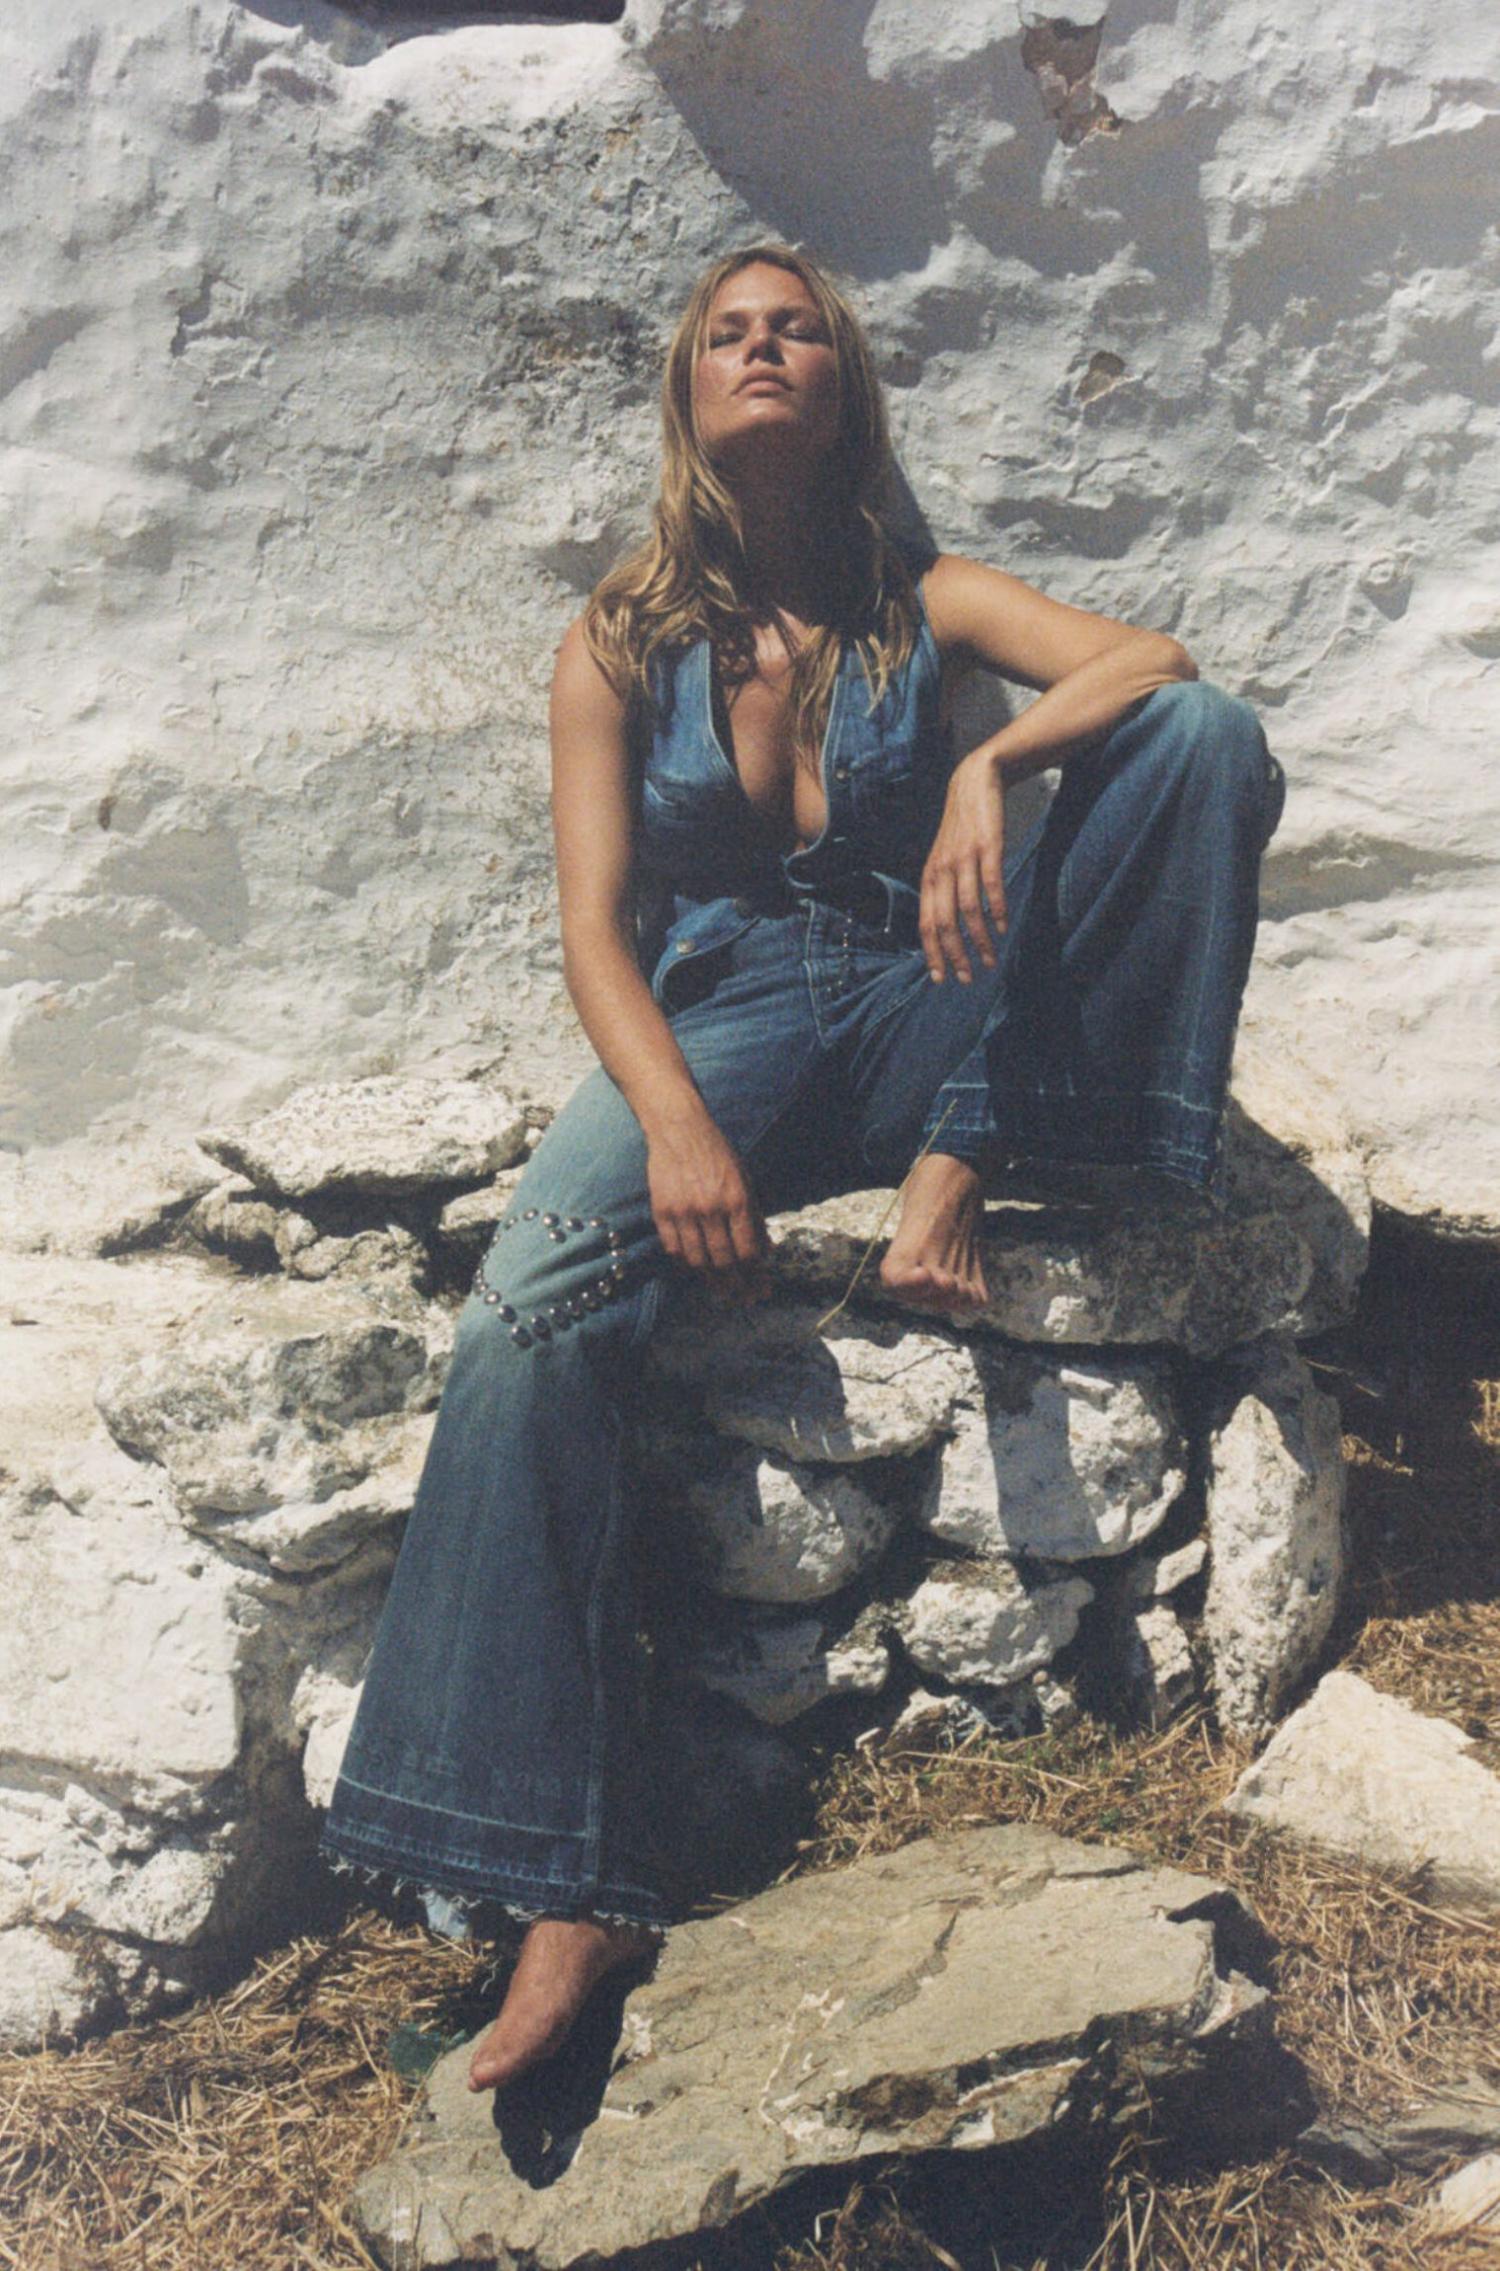 Clothing: Denim Gilet and Jeans by Gucci; Makeup using Dior Beauty